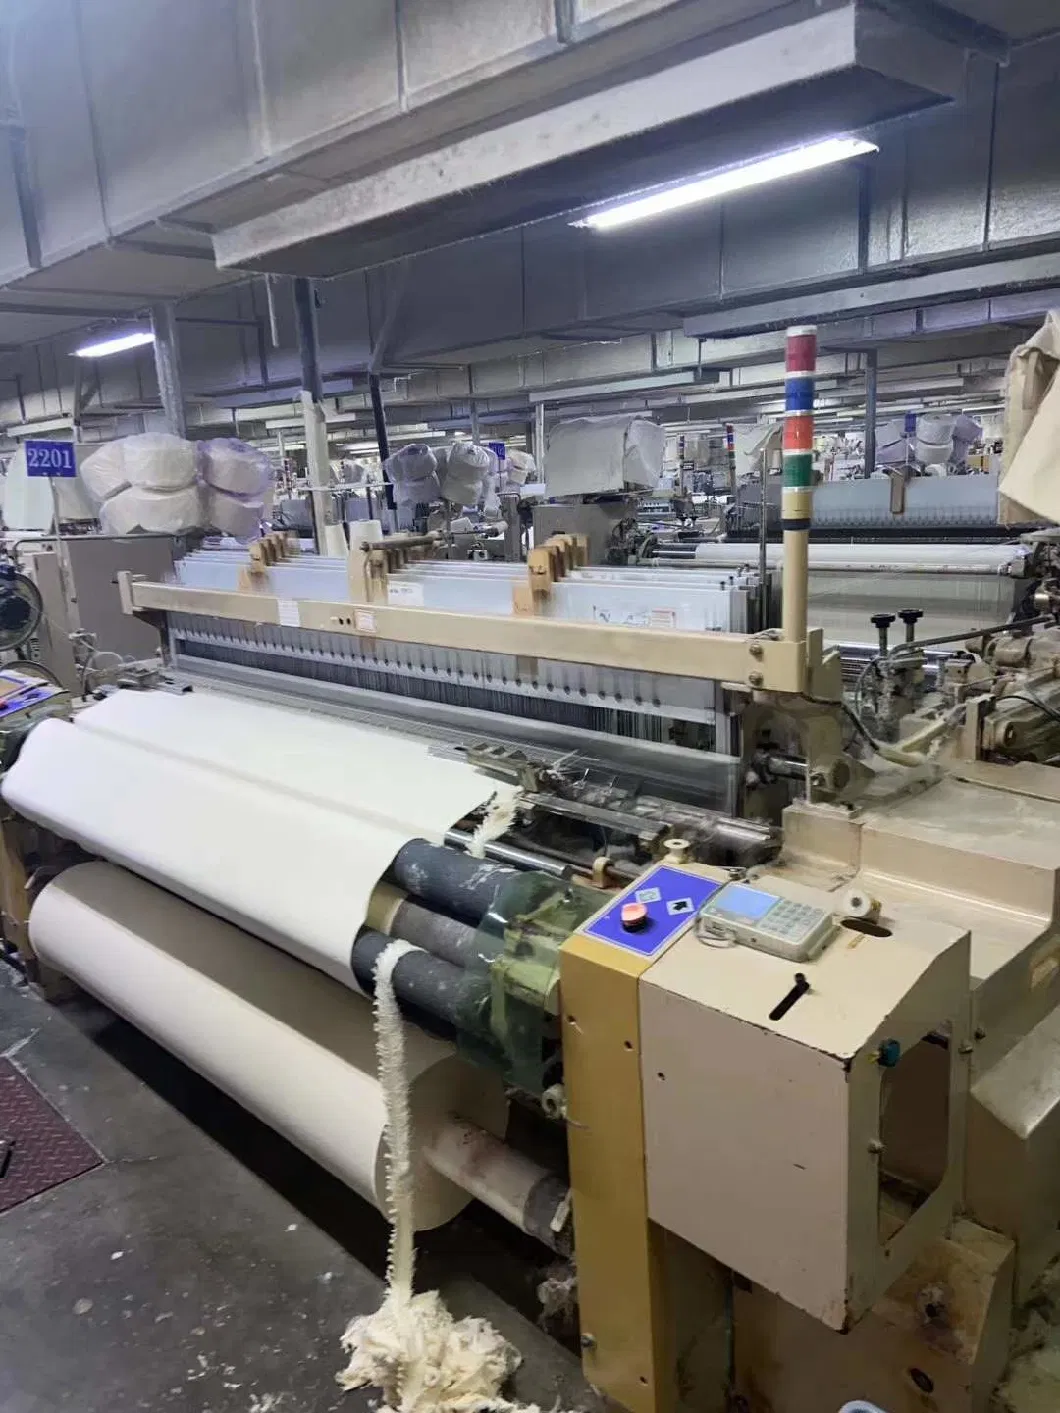 Cheap Price Air Jet Loom, Second-Hand Japan Zax-E-190 Textile Machine in Hot Selling